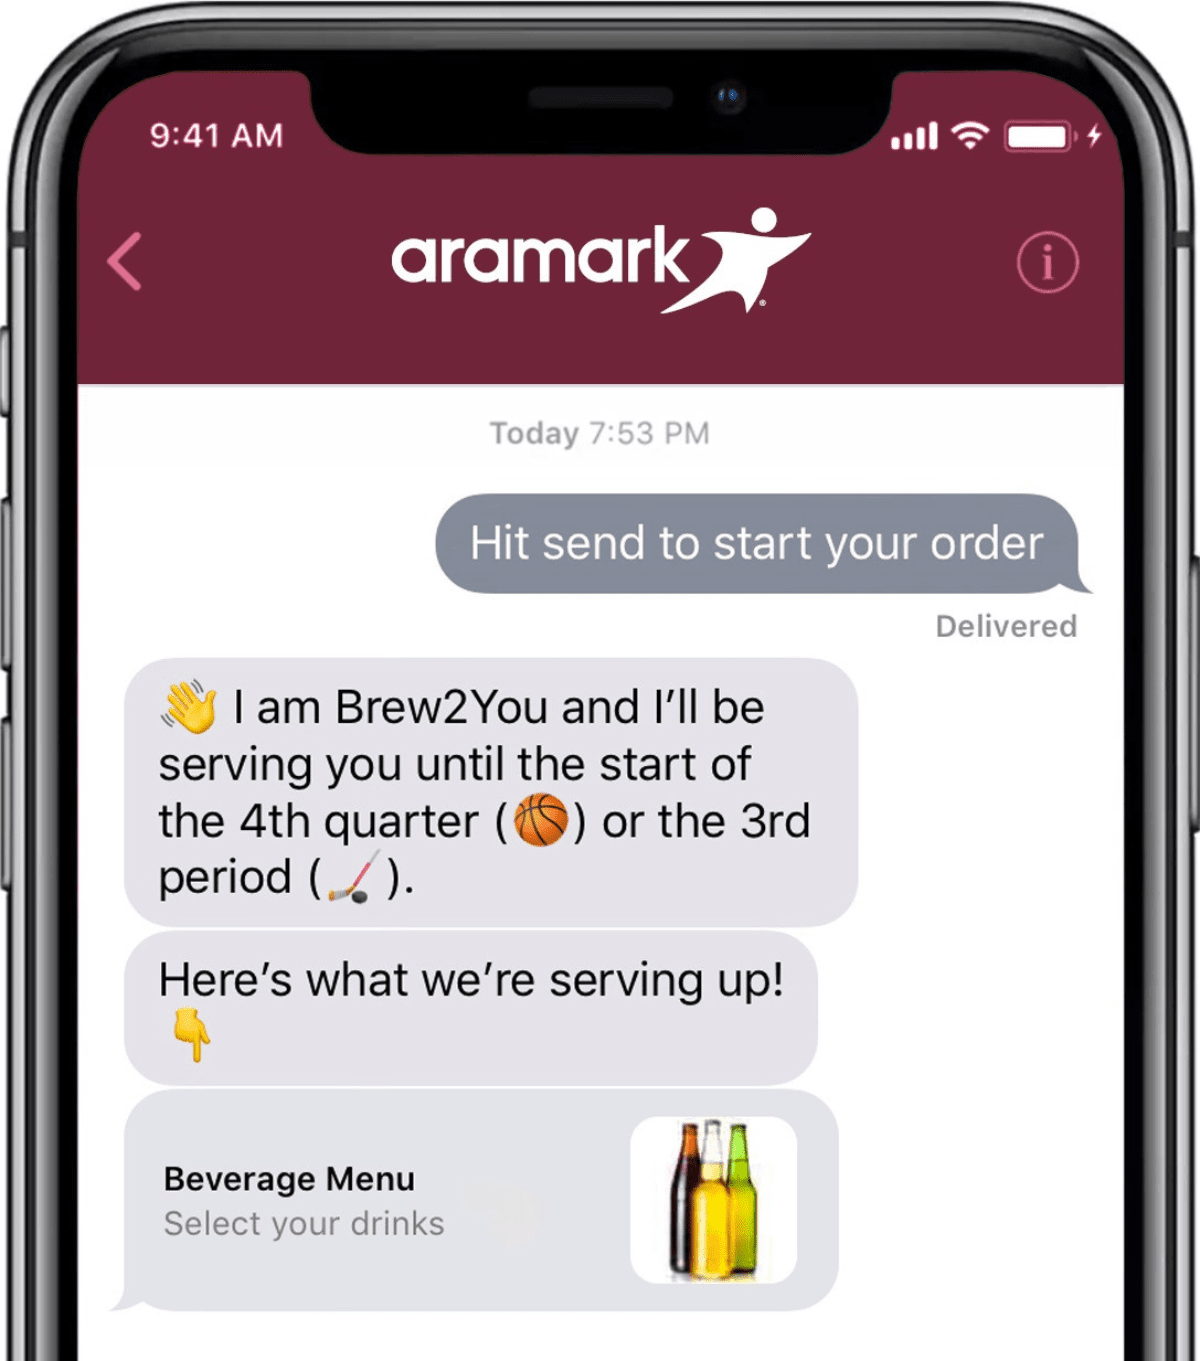 image of aramark business chat